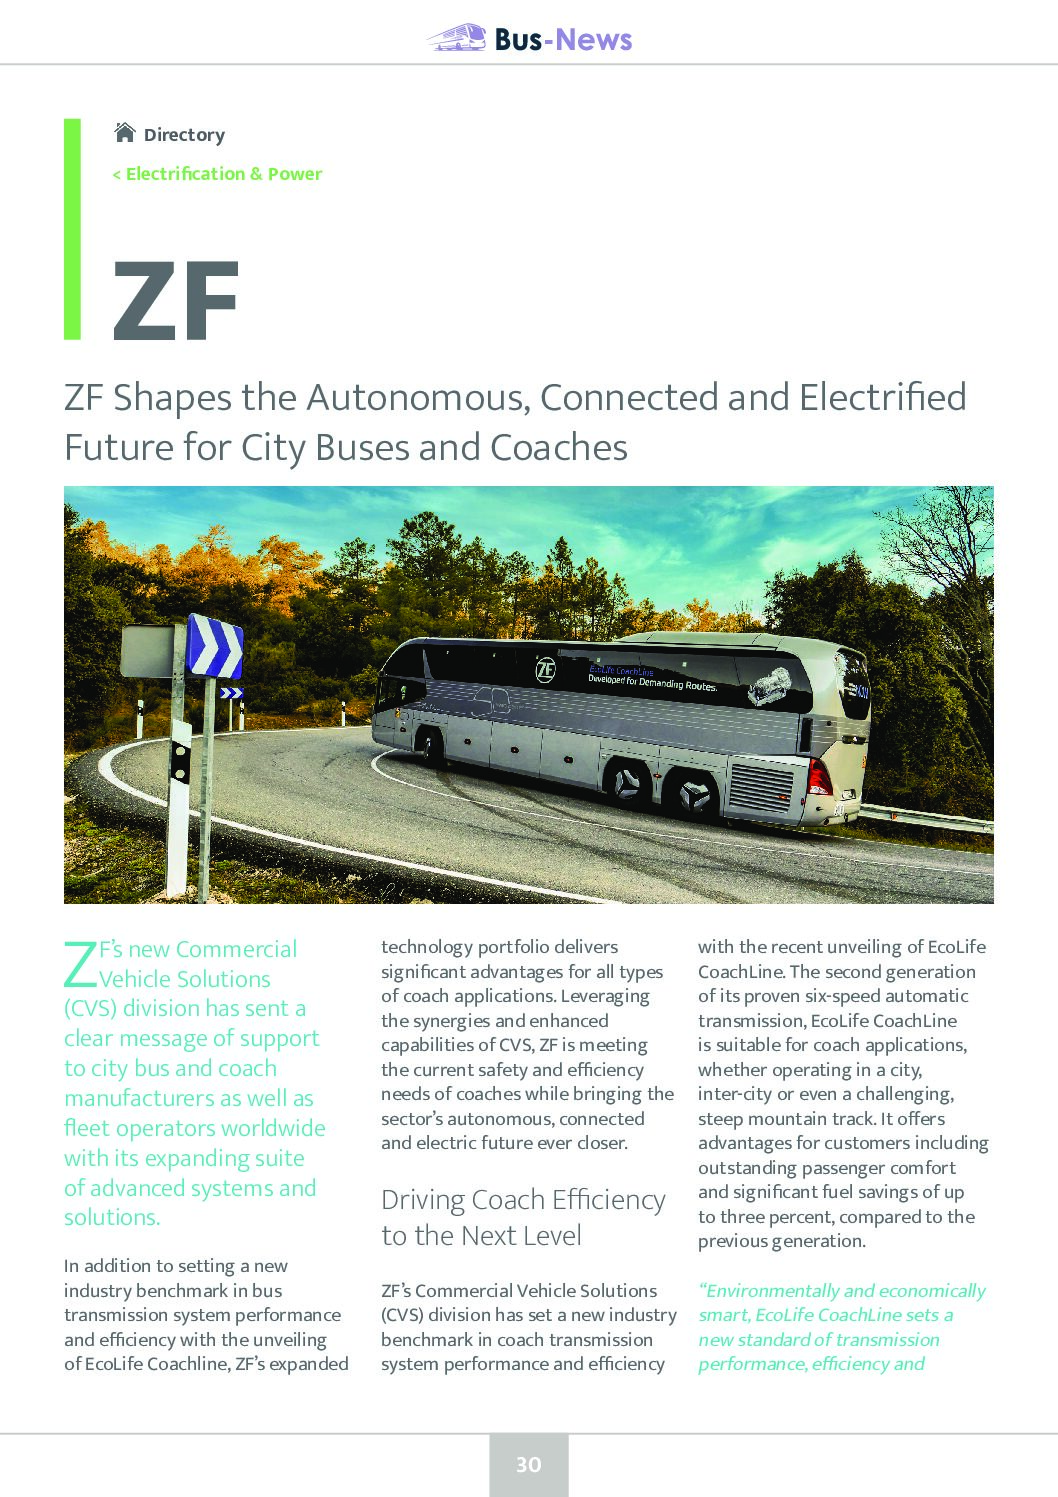 ZF Shapes the Autonomous, Connected and Electrified Future for City Buses and Coaches